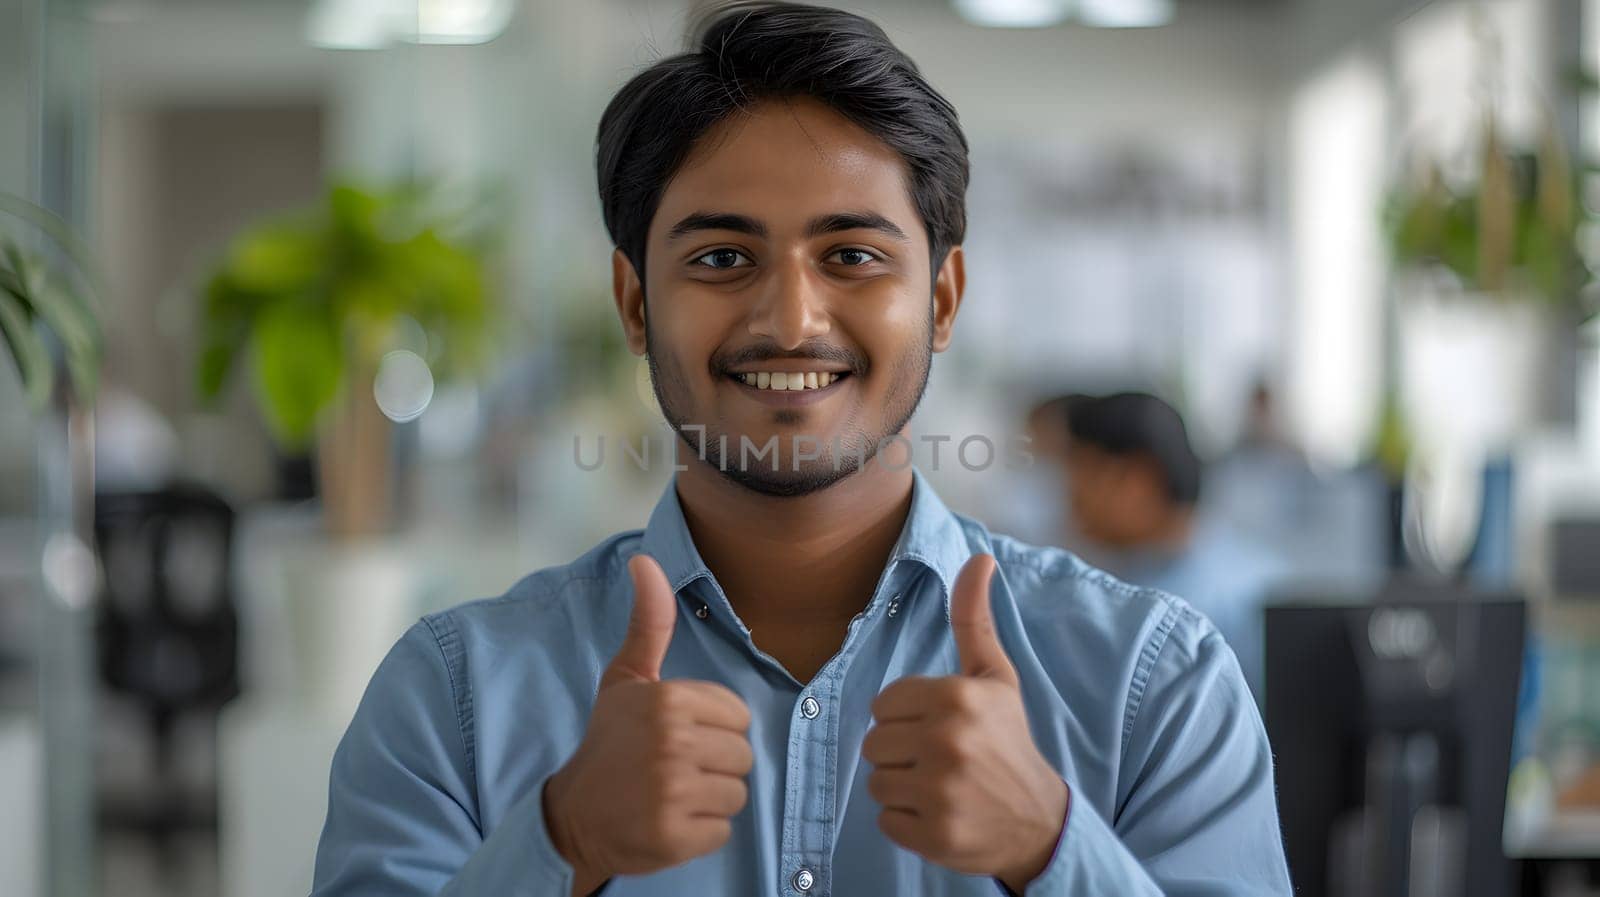 A happy young man in a dress shirt is giving two thumbs up gesture in the office by Nadtochiy